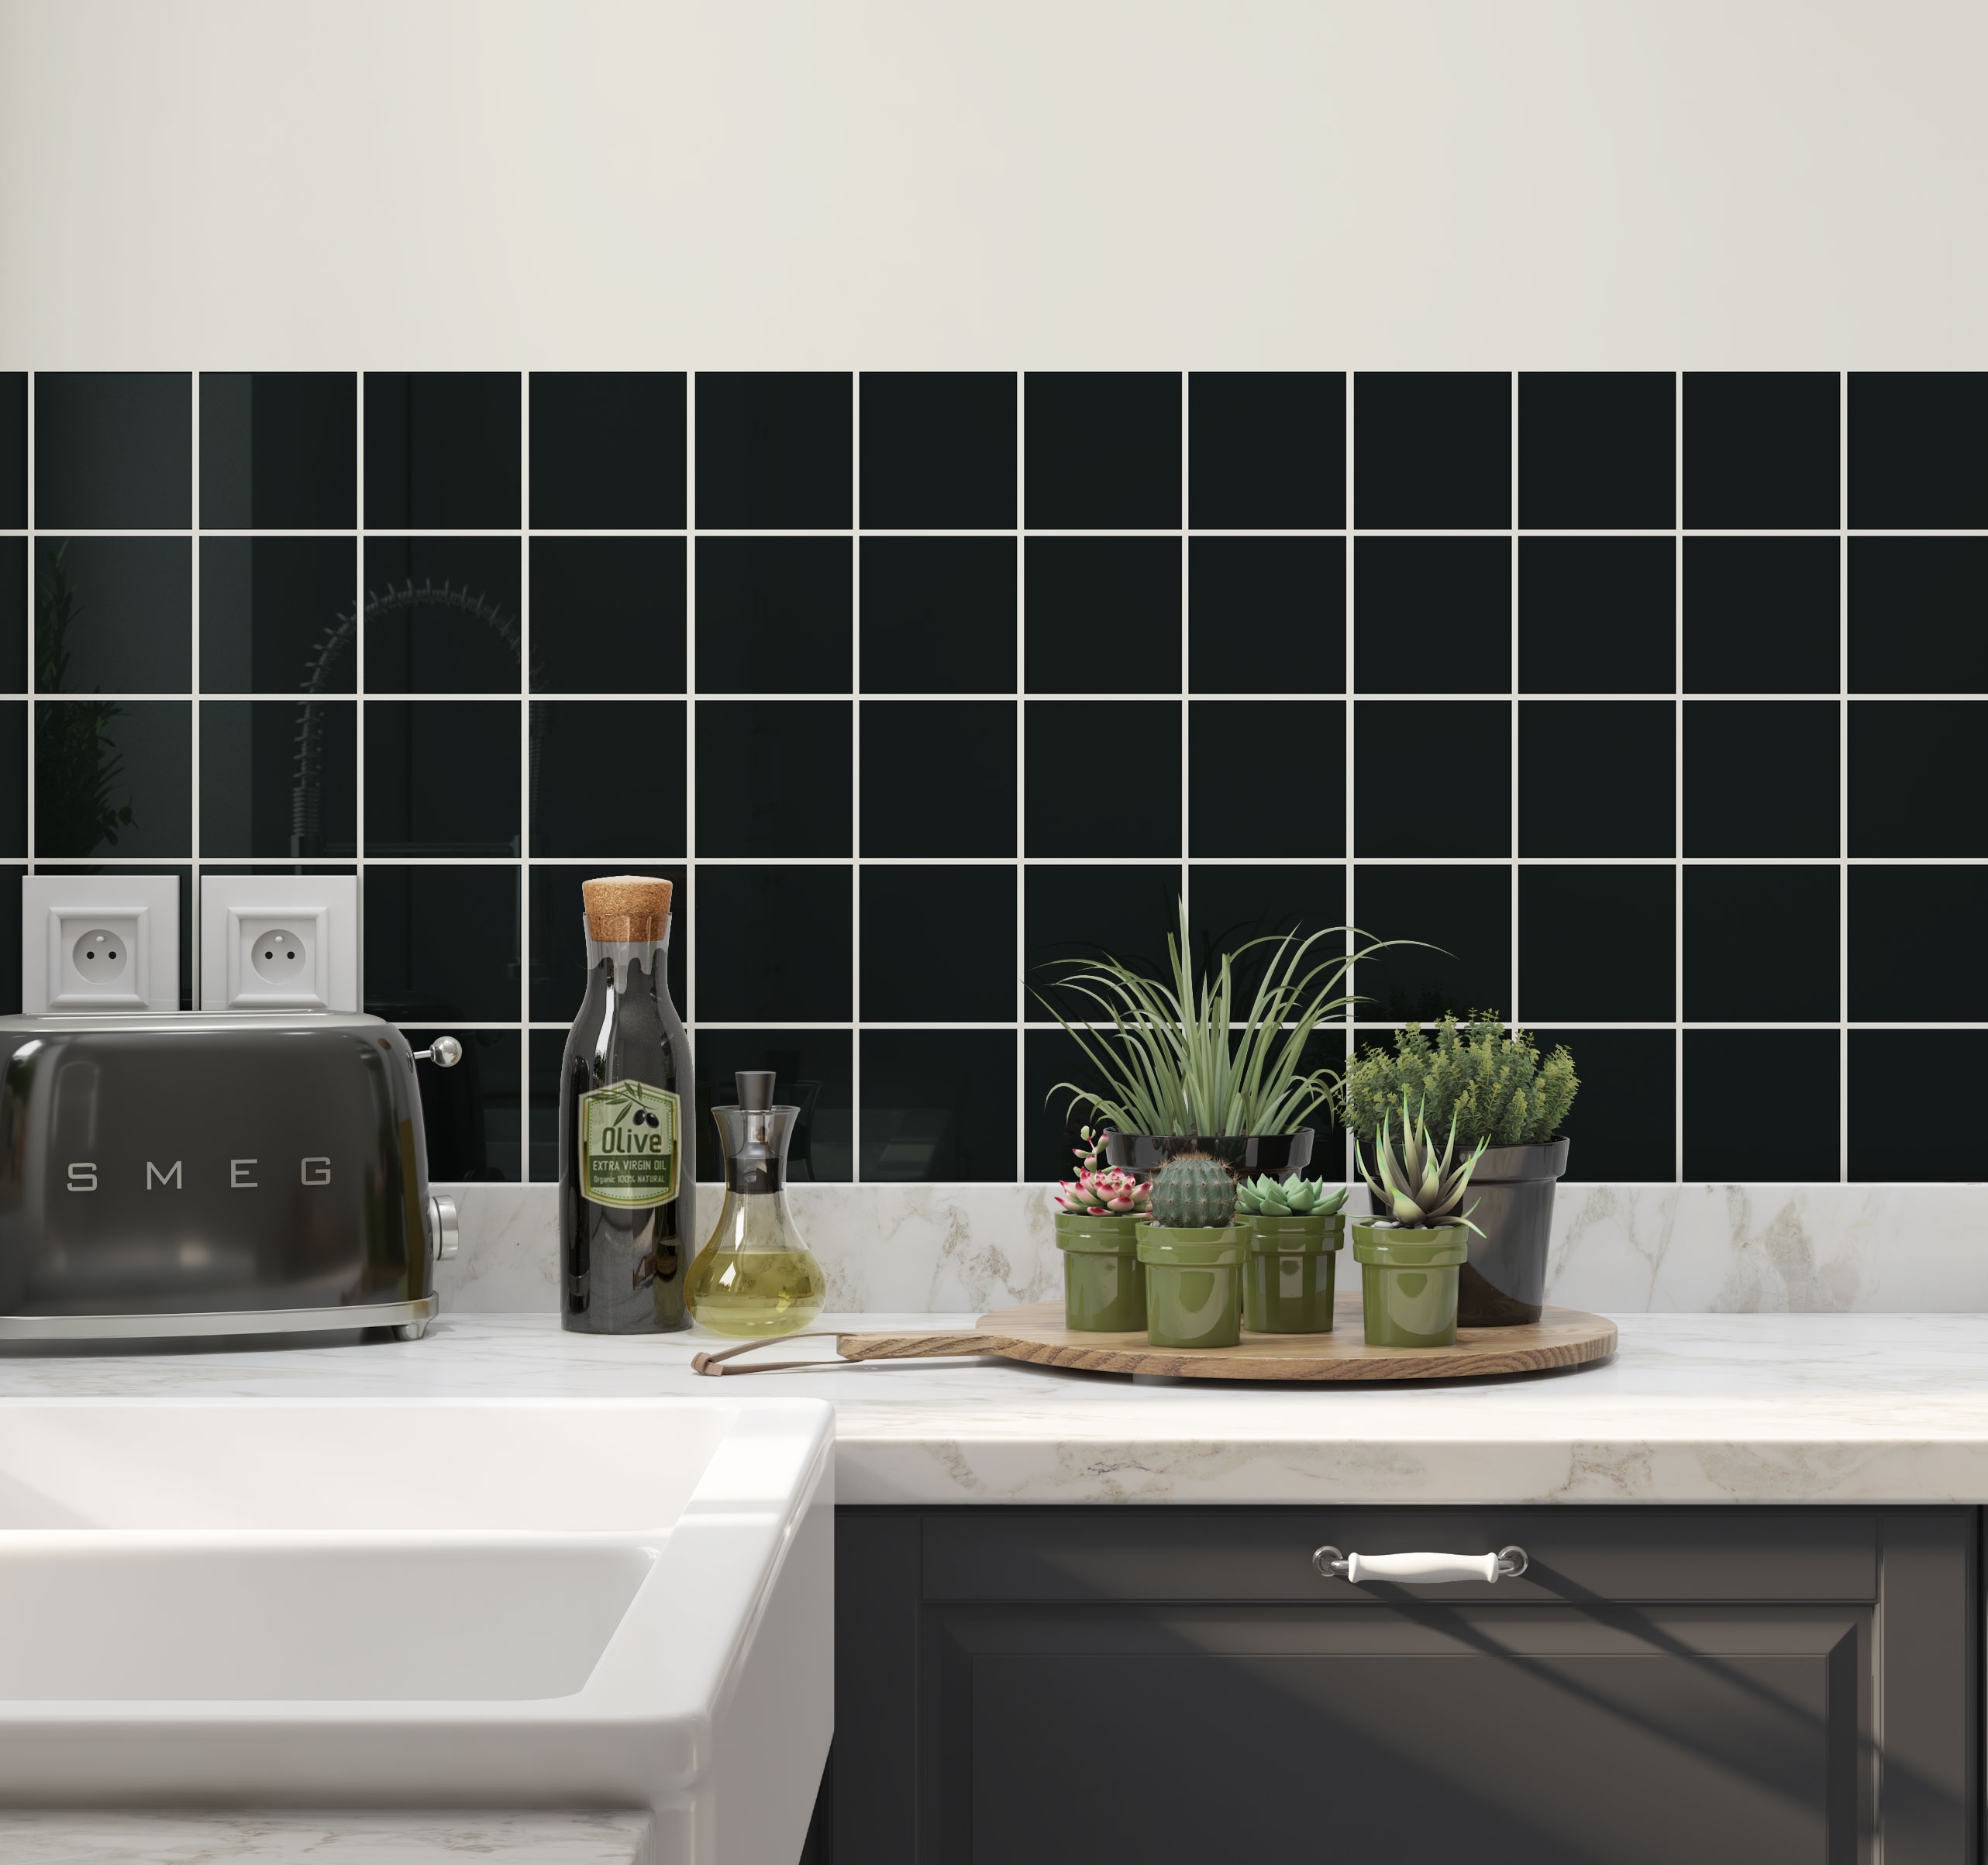 Johnsons Prismatics Square Gloss Black Tiles used in a  modern kitchen with white work tops and potted plants.